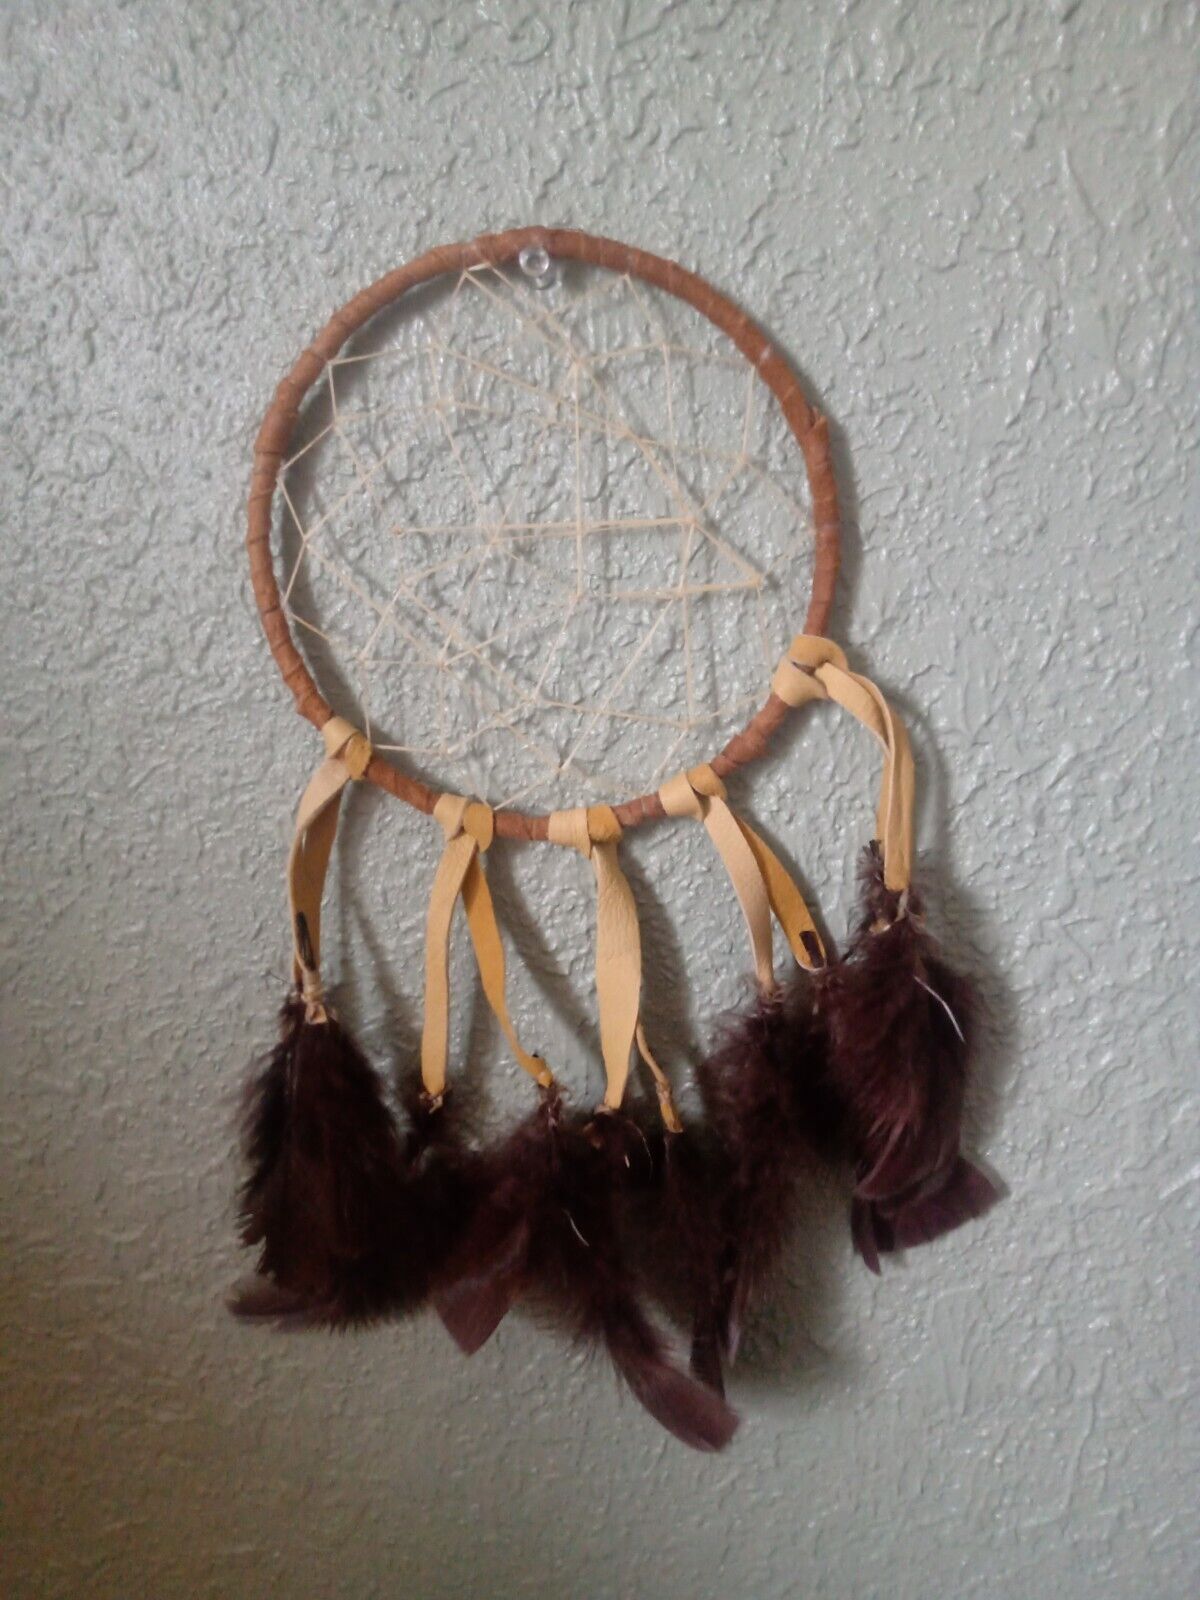 Dream Catcher, Handcrafted, Handwoven, Native American Indian Traditional Ojibwe